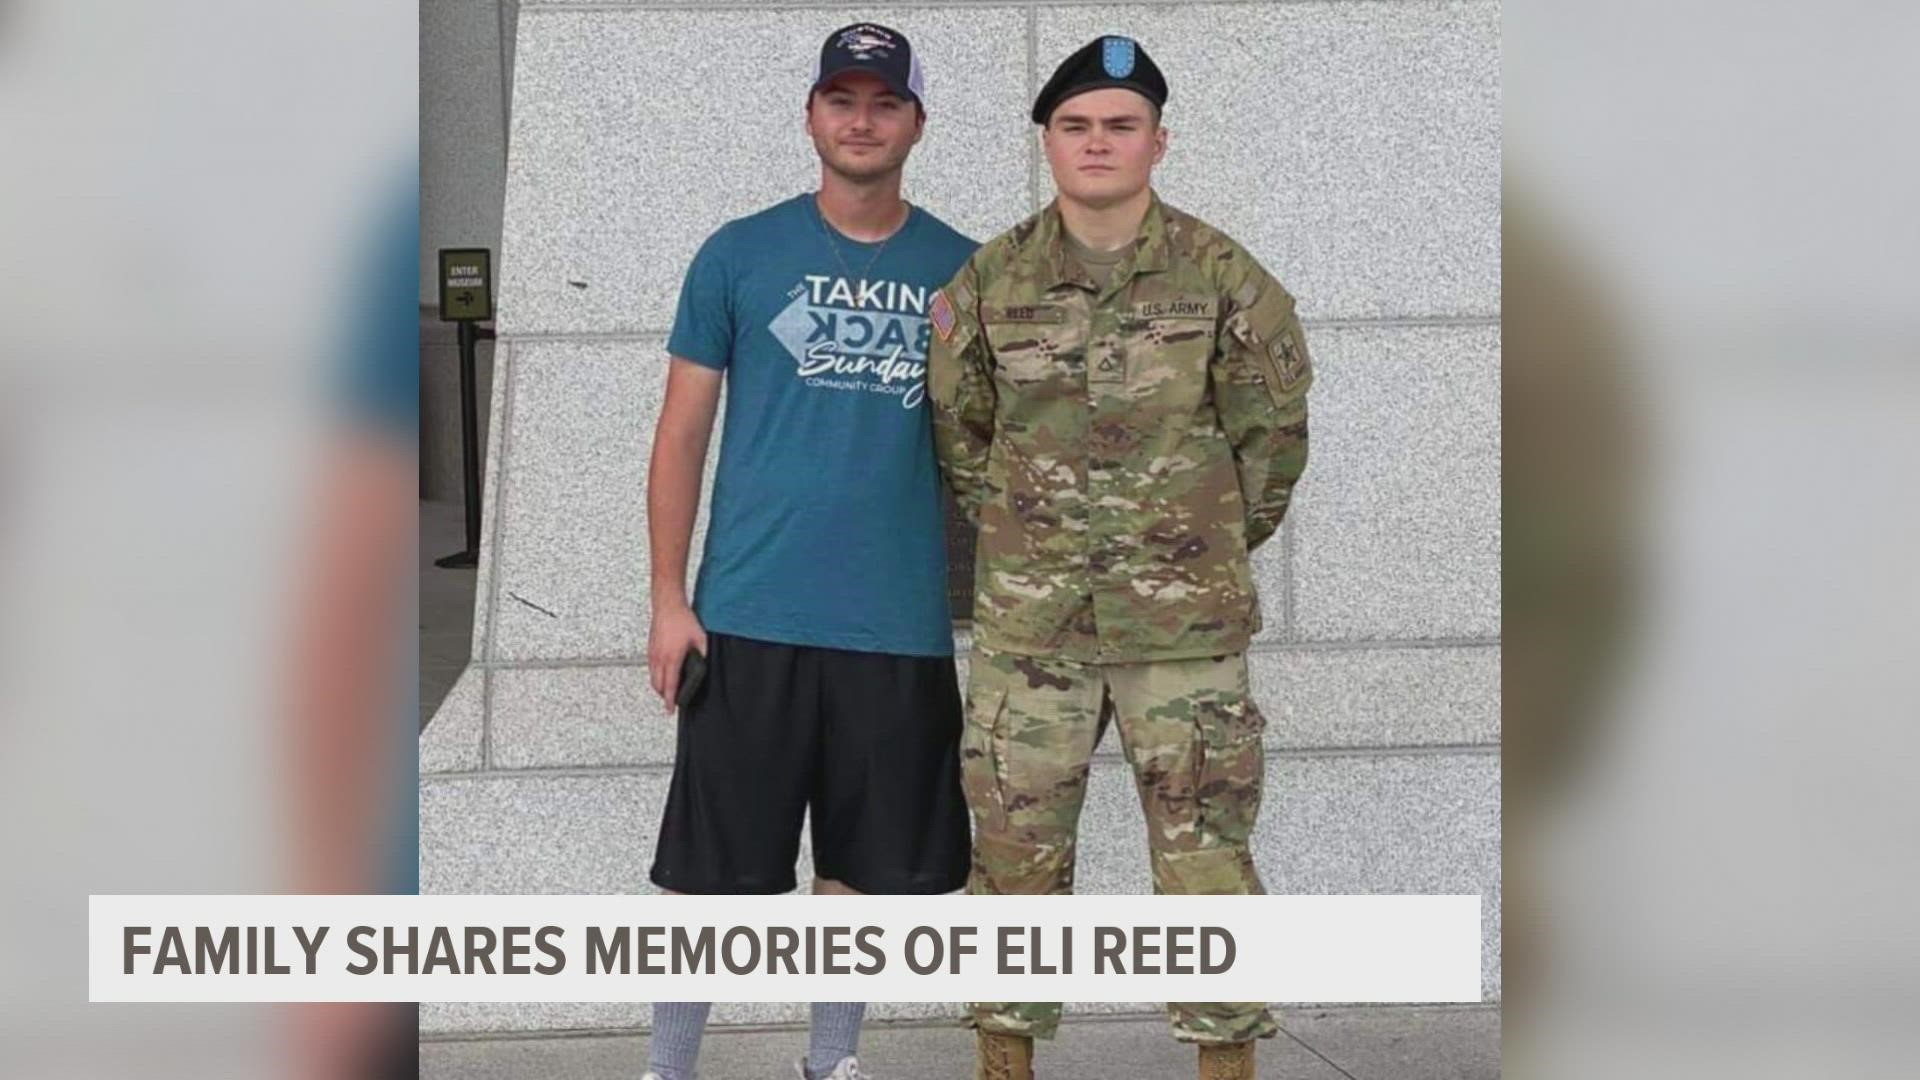 Reed's family described him as loving, jovial and dedicated. The 21-year-old Iowa National Guard member died after police say his roommate accidentally shot him.